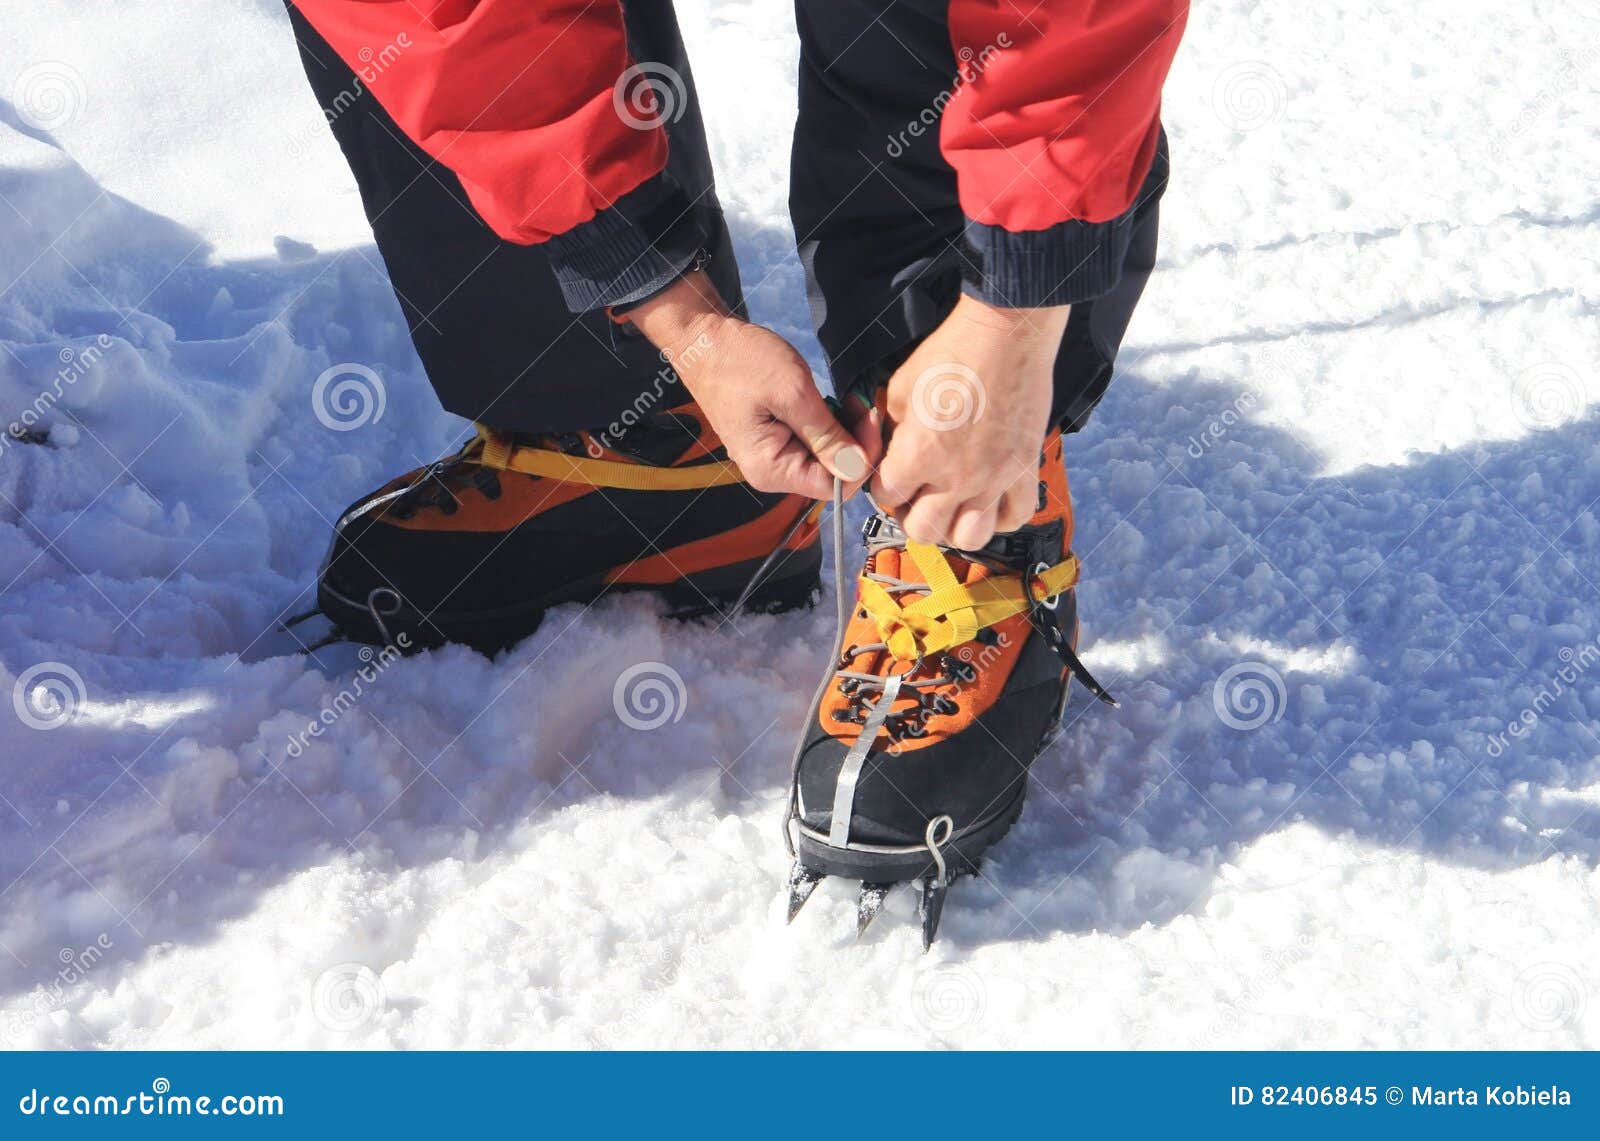 crampons closeup. crampons closeup. crampon on winter boot for c